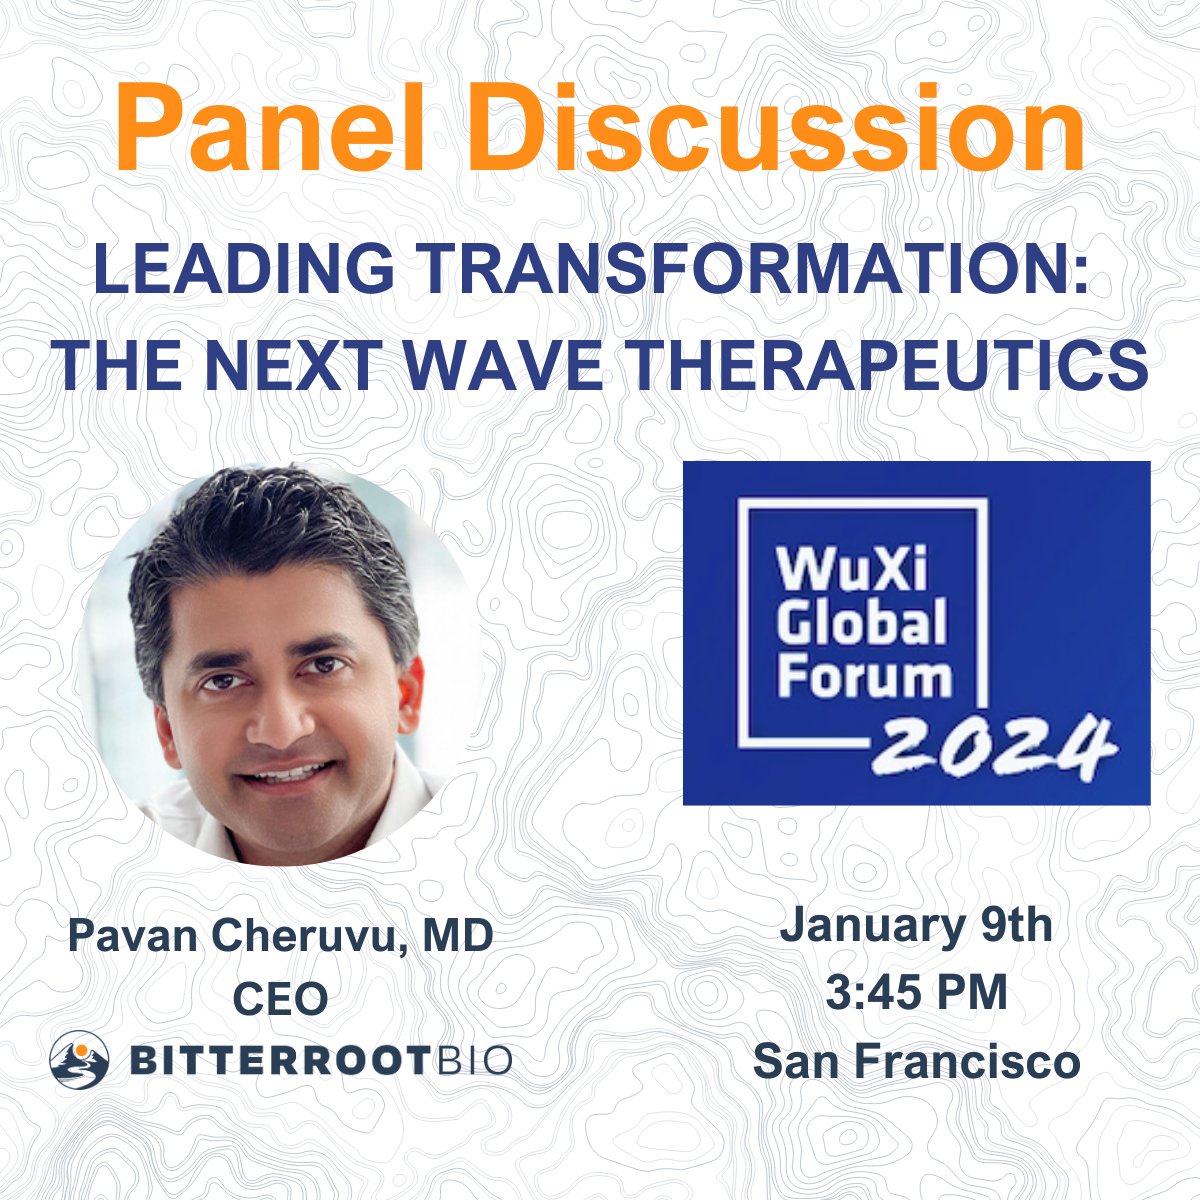 Bitterroot Bio CEO, @PavanCheruvuMD, to participate in a panel discussion at the 12th WuXi Global Forum: 'Leading Transformation: The Next Wave Therapeutics' on January 9th in San Francisco. Learn more here: lnkd.in/ggbqGe2F #JPM2024 #WuXiGlobalForum #BitterrootBio